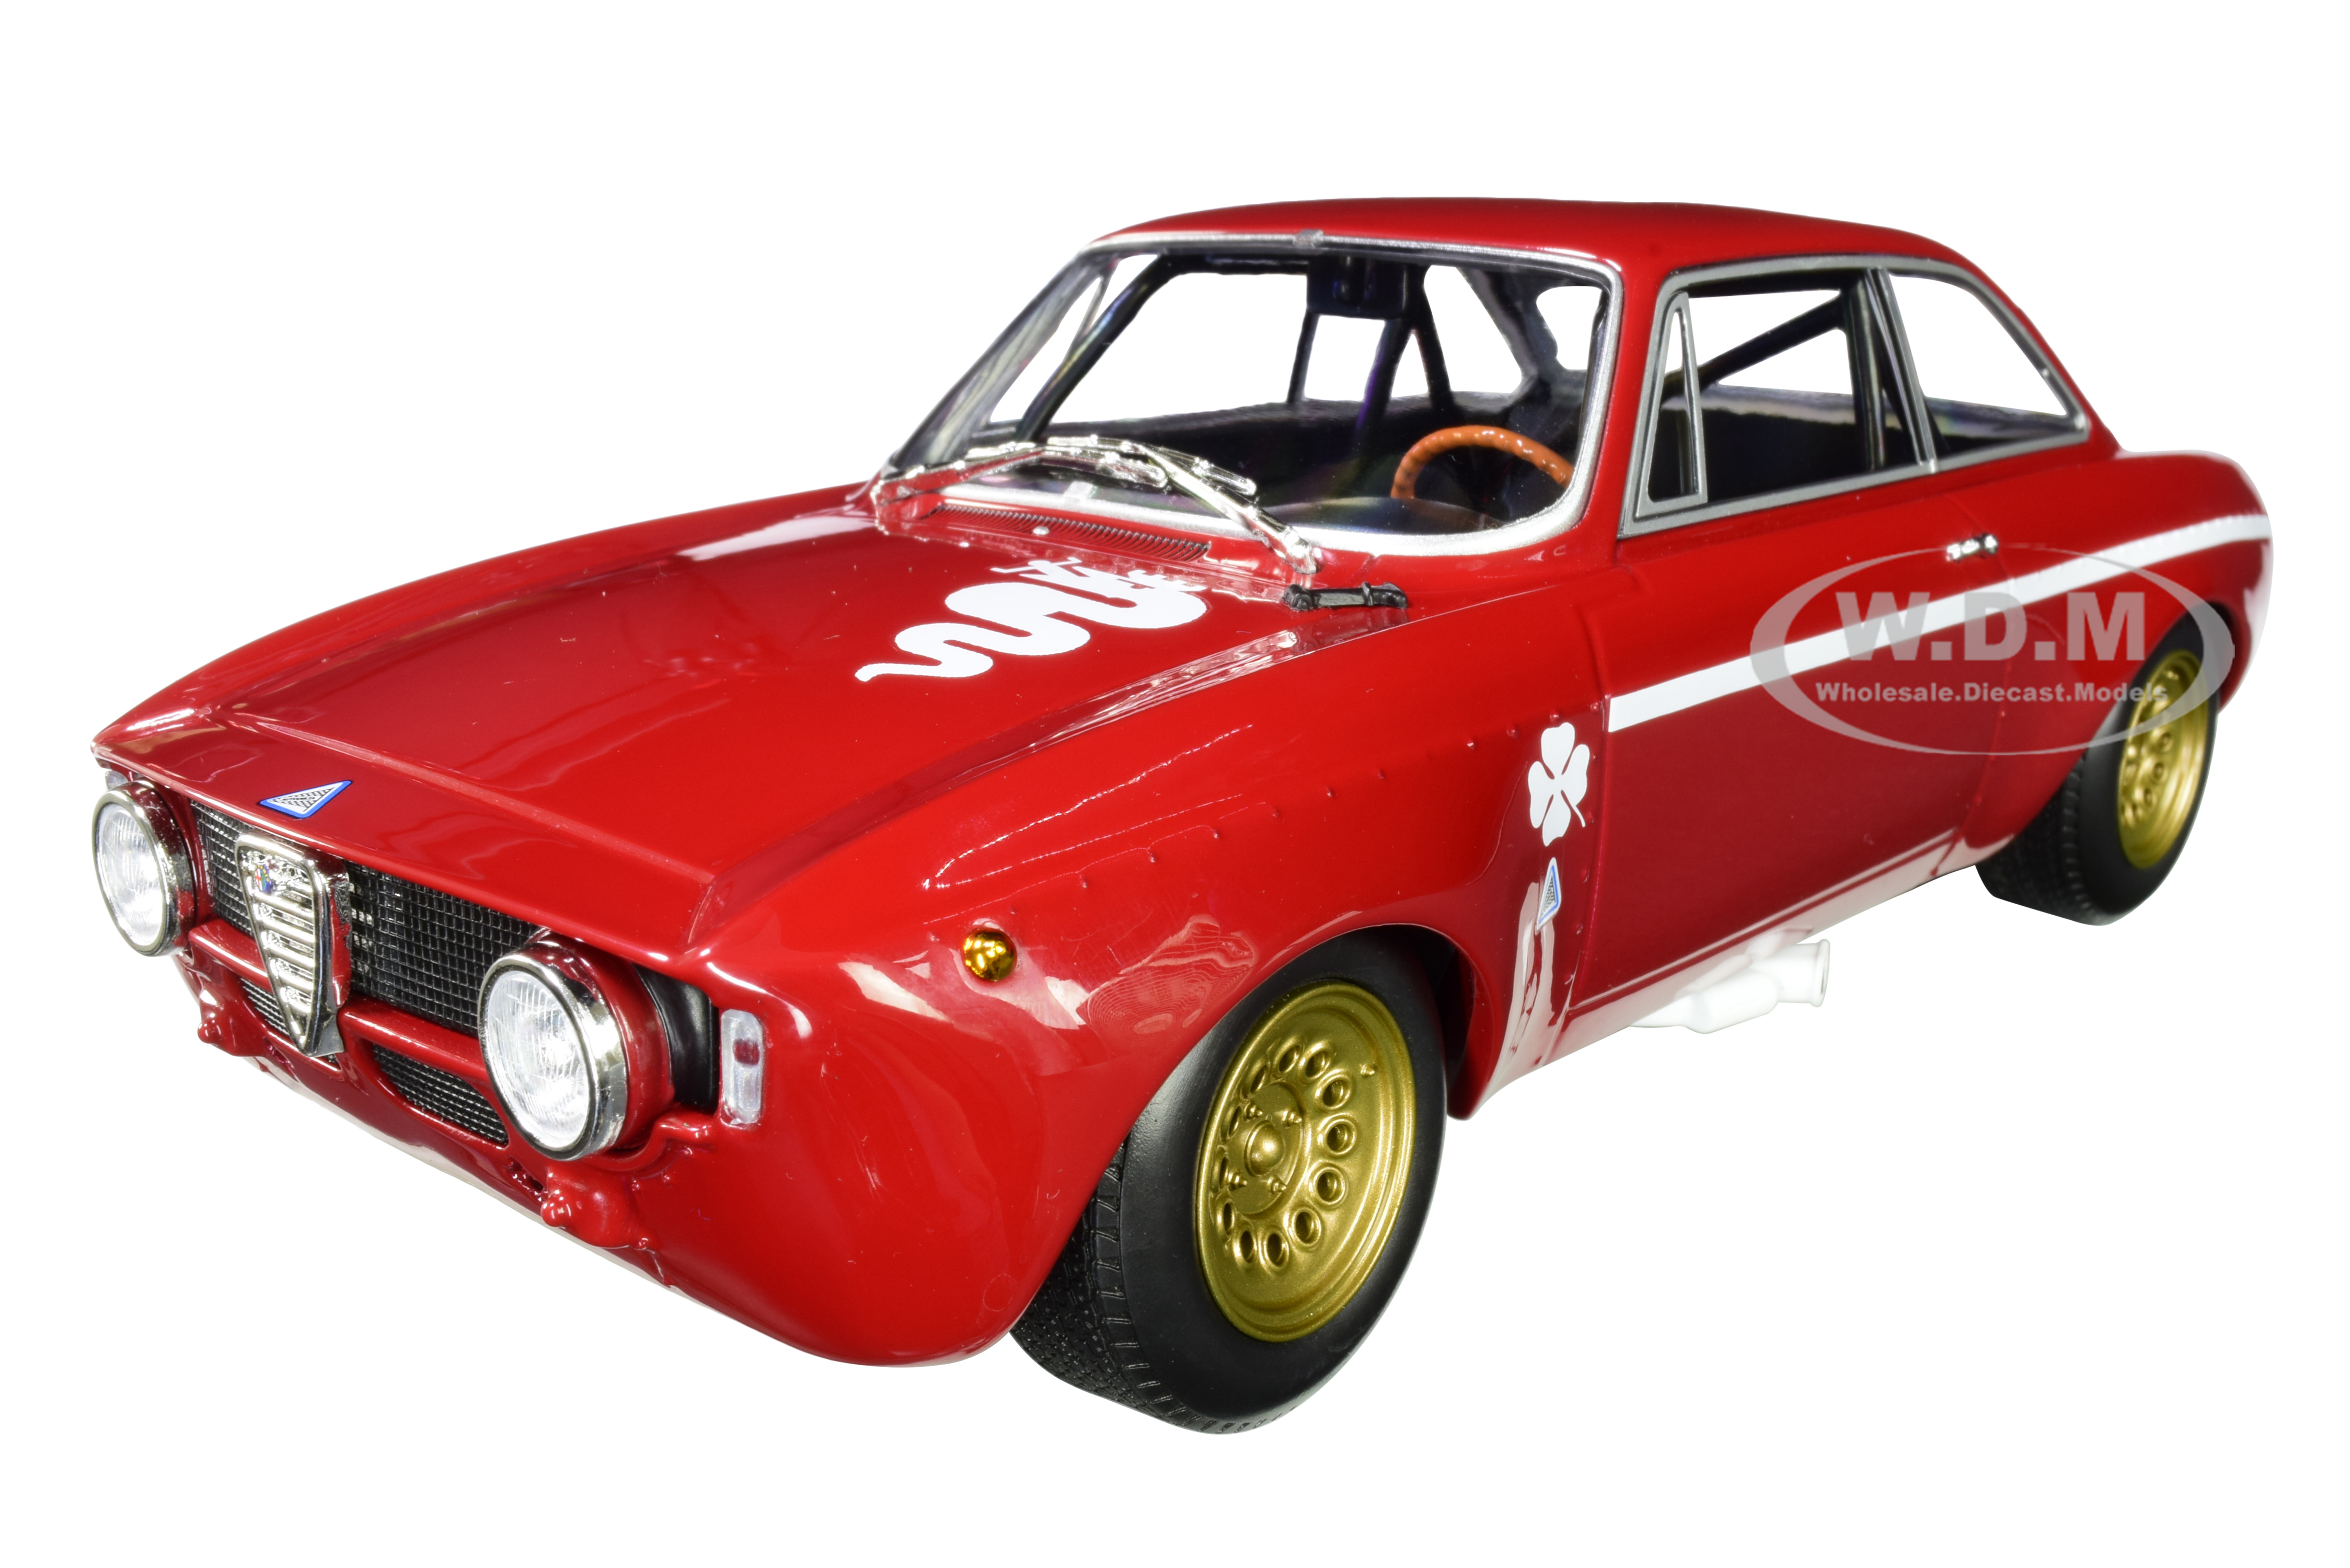 1971 Alfa Romeo Gta 1300 Junior Red Limited Edition To 600 Pieces Worldwide 1/18 Diecast Model Car By Minichamps